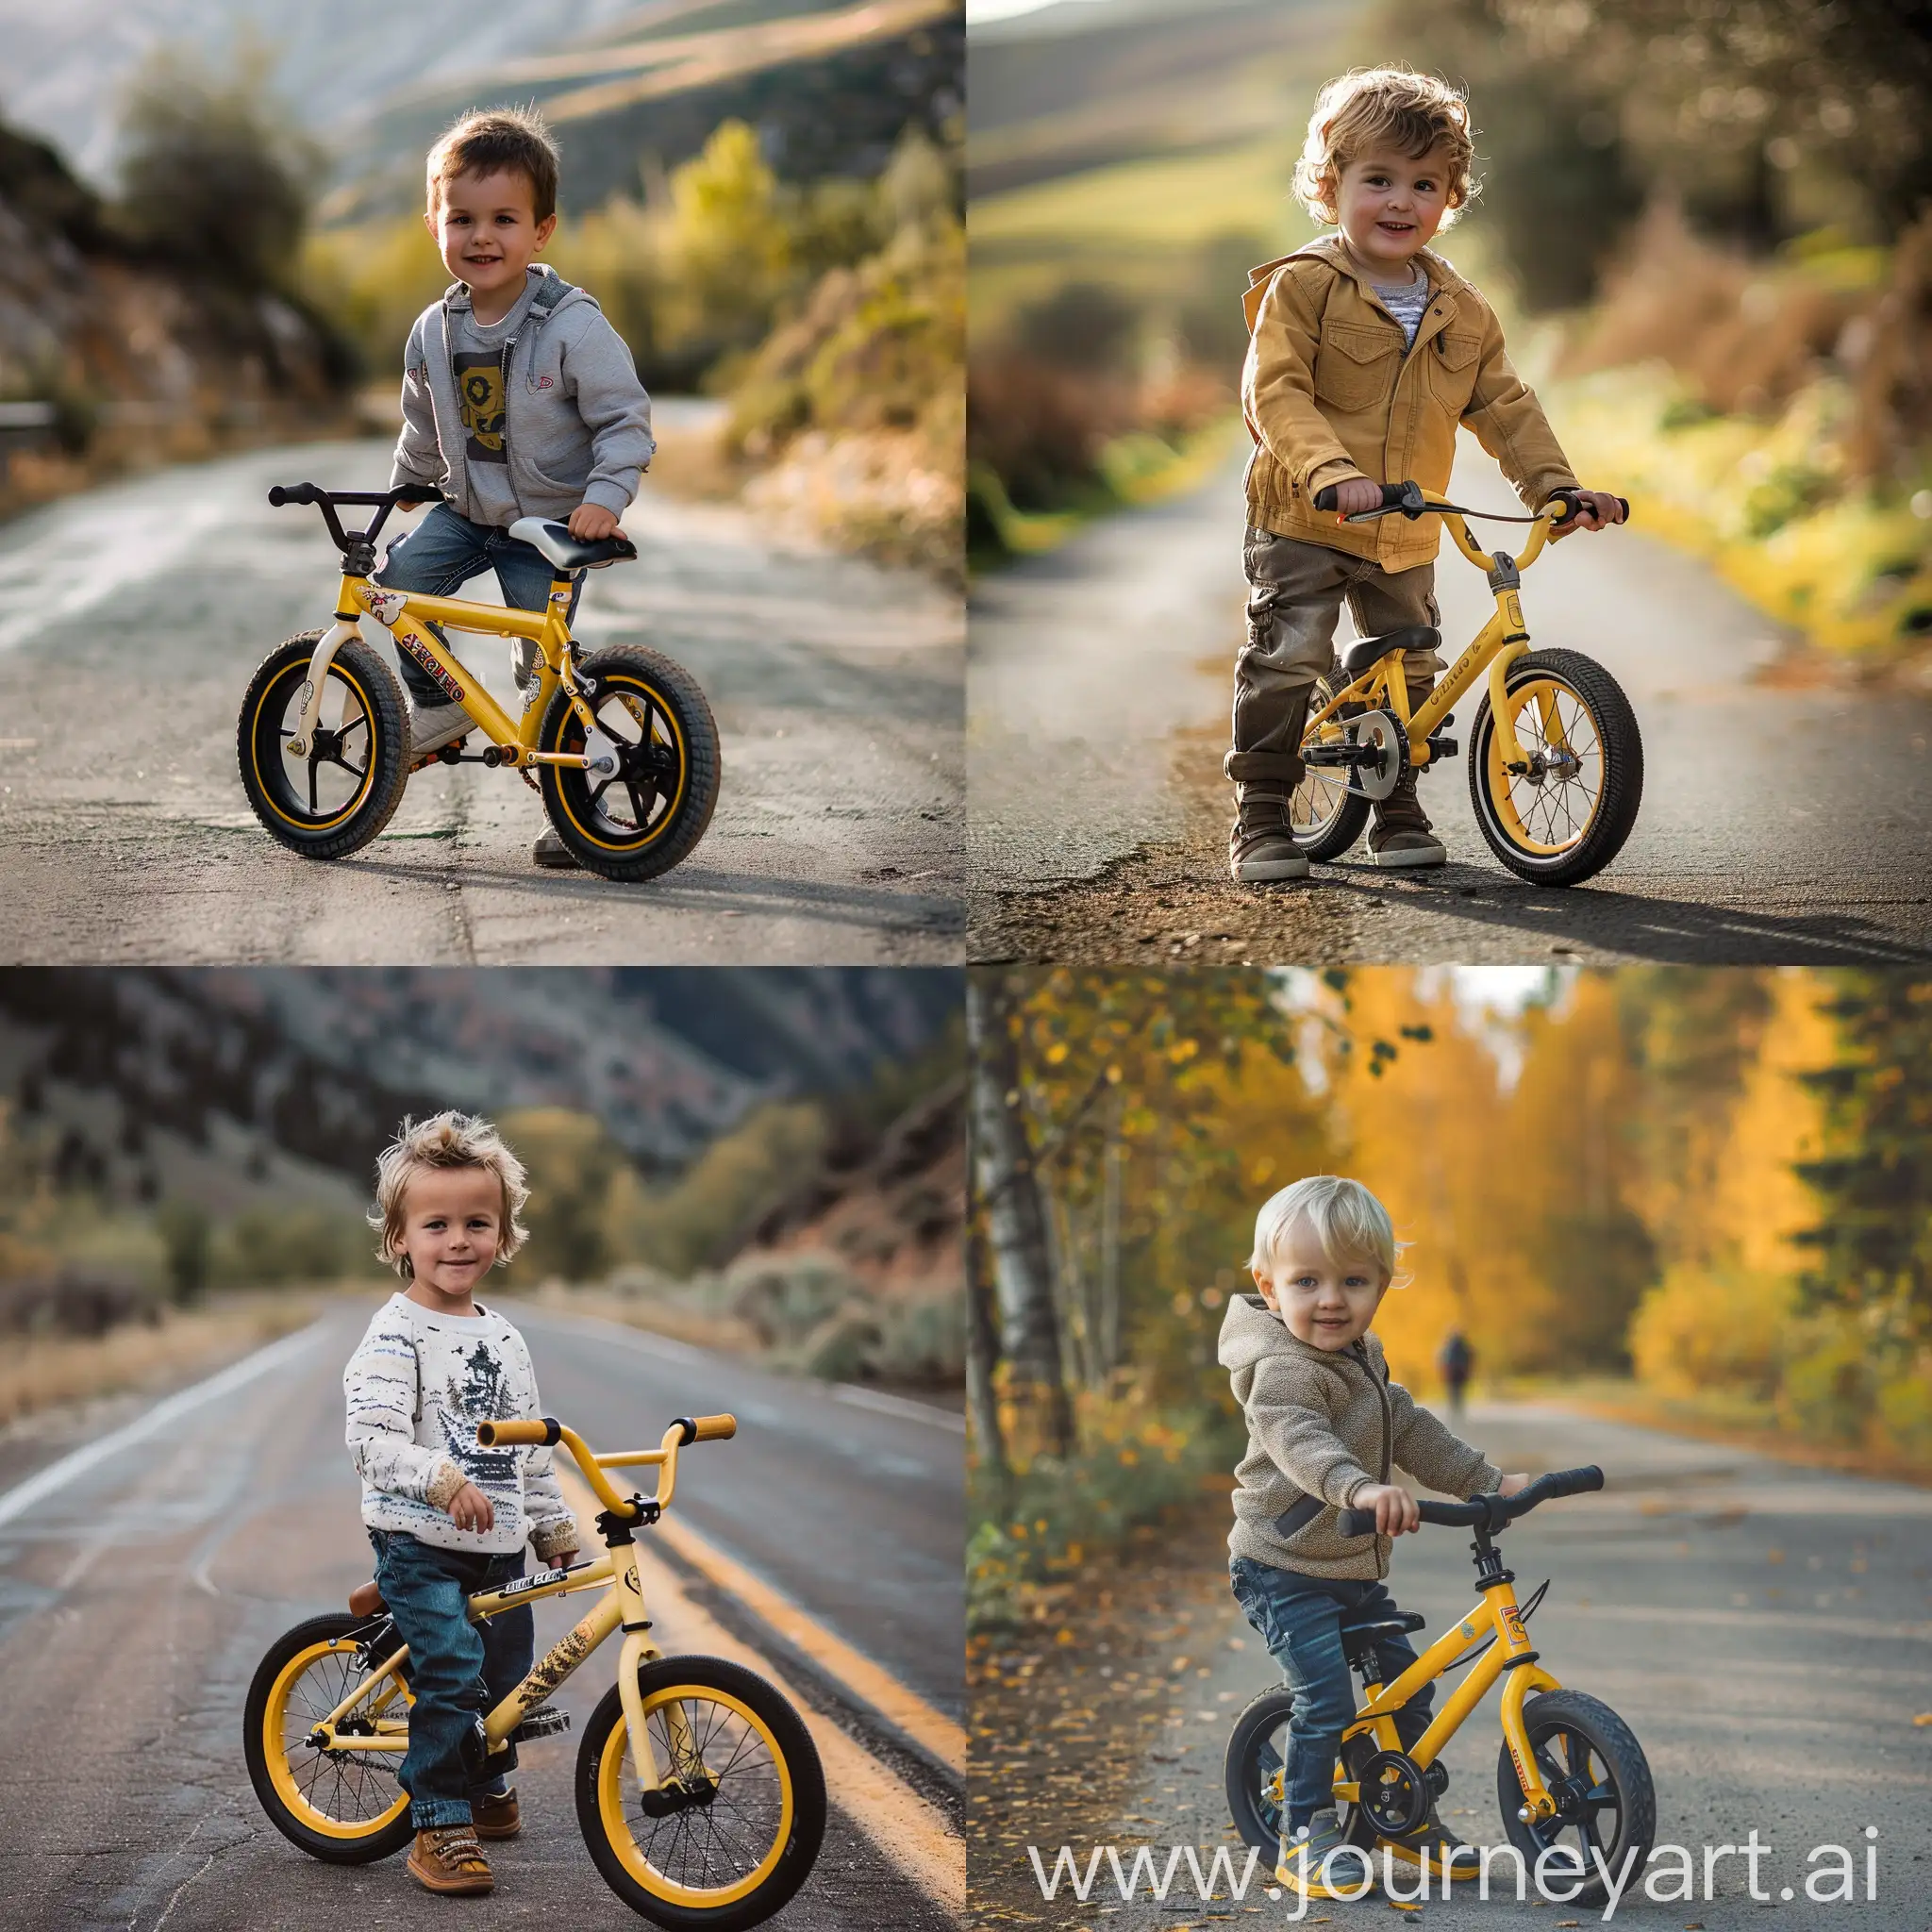 Young-Boy-Riding-Yellow-Bicycle-Along-Country-Road